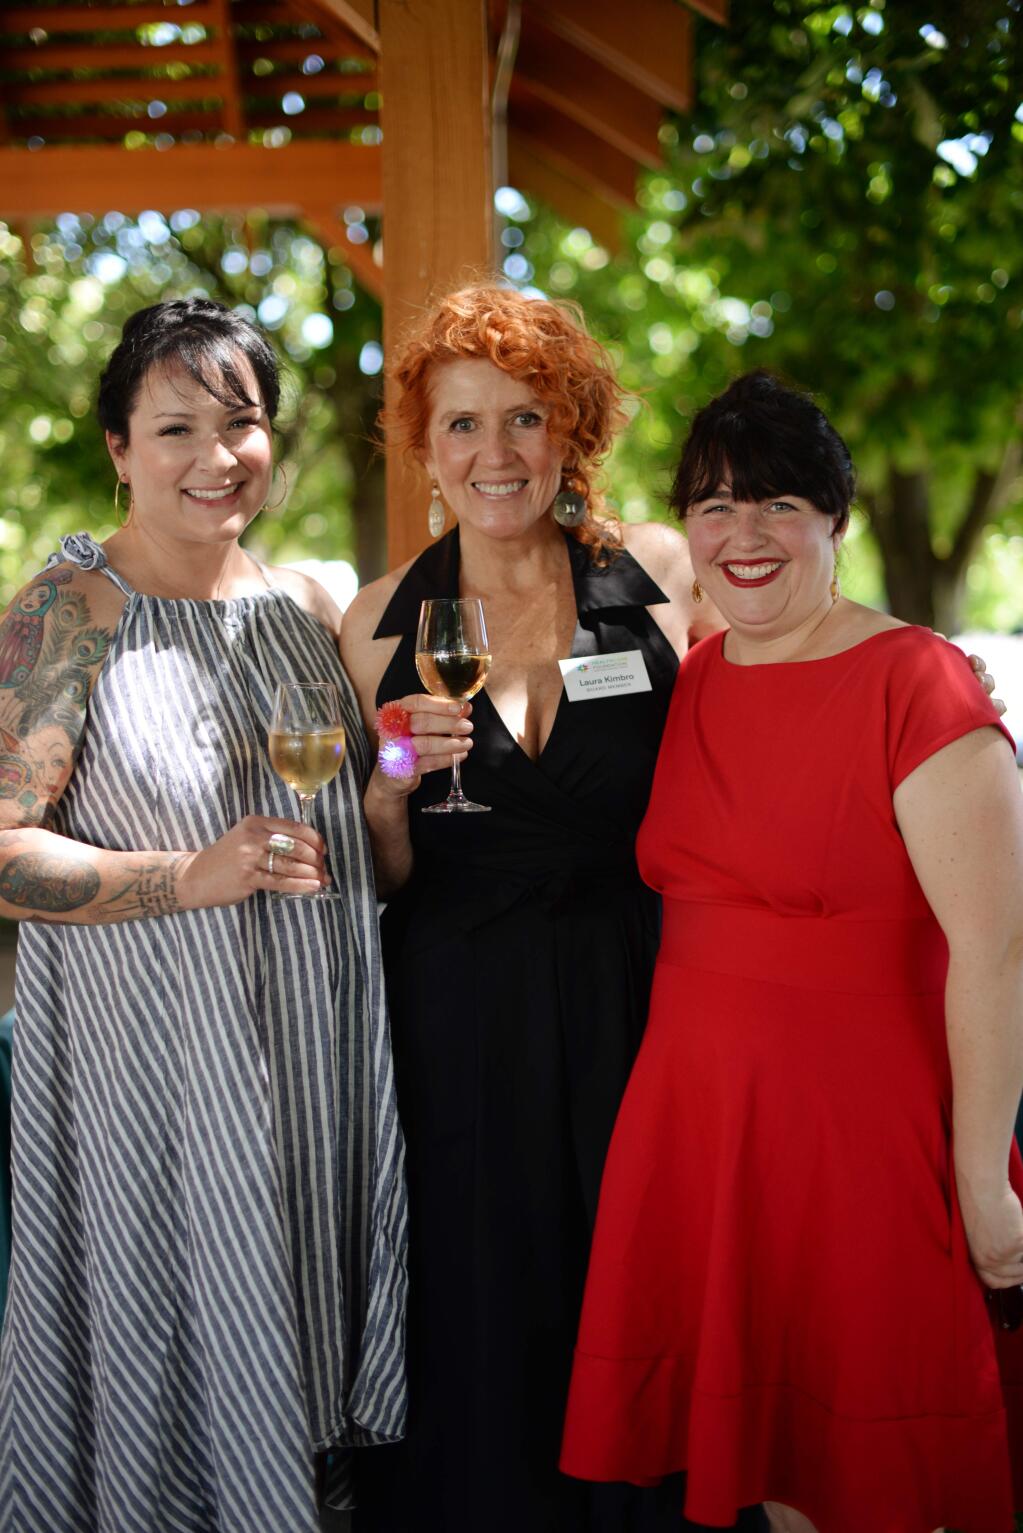 From left, Bonnie Headley, Laura Kimbro and Liza Hinman during Wine Women & Shoes event held Saturday at Clos Du Bois Winery in Geyserville, California. The event benefits Healthcare Foundation Northern Sonoma County. June 23, 2018.(Photo: Erik Castro/for The Press Democrat)